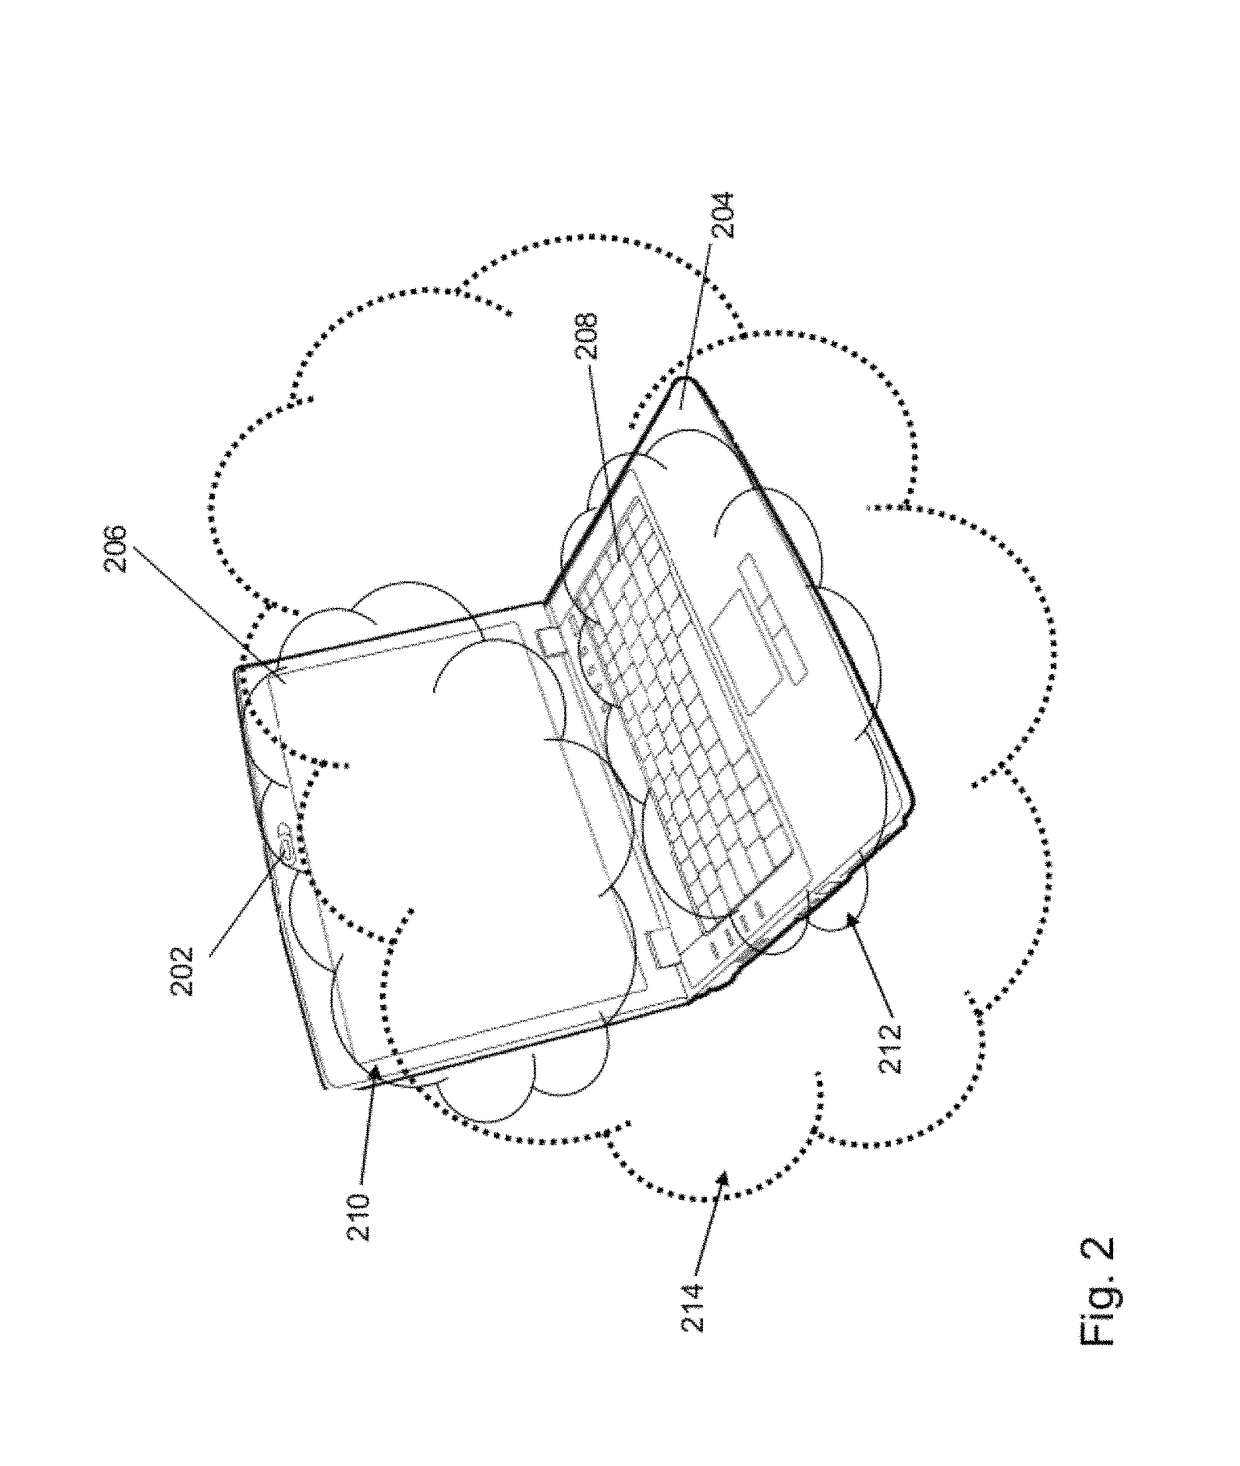 Method and system for ergonomic touch-free interface